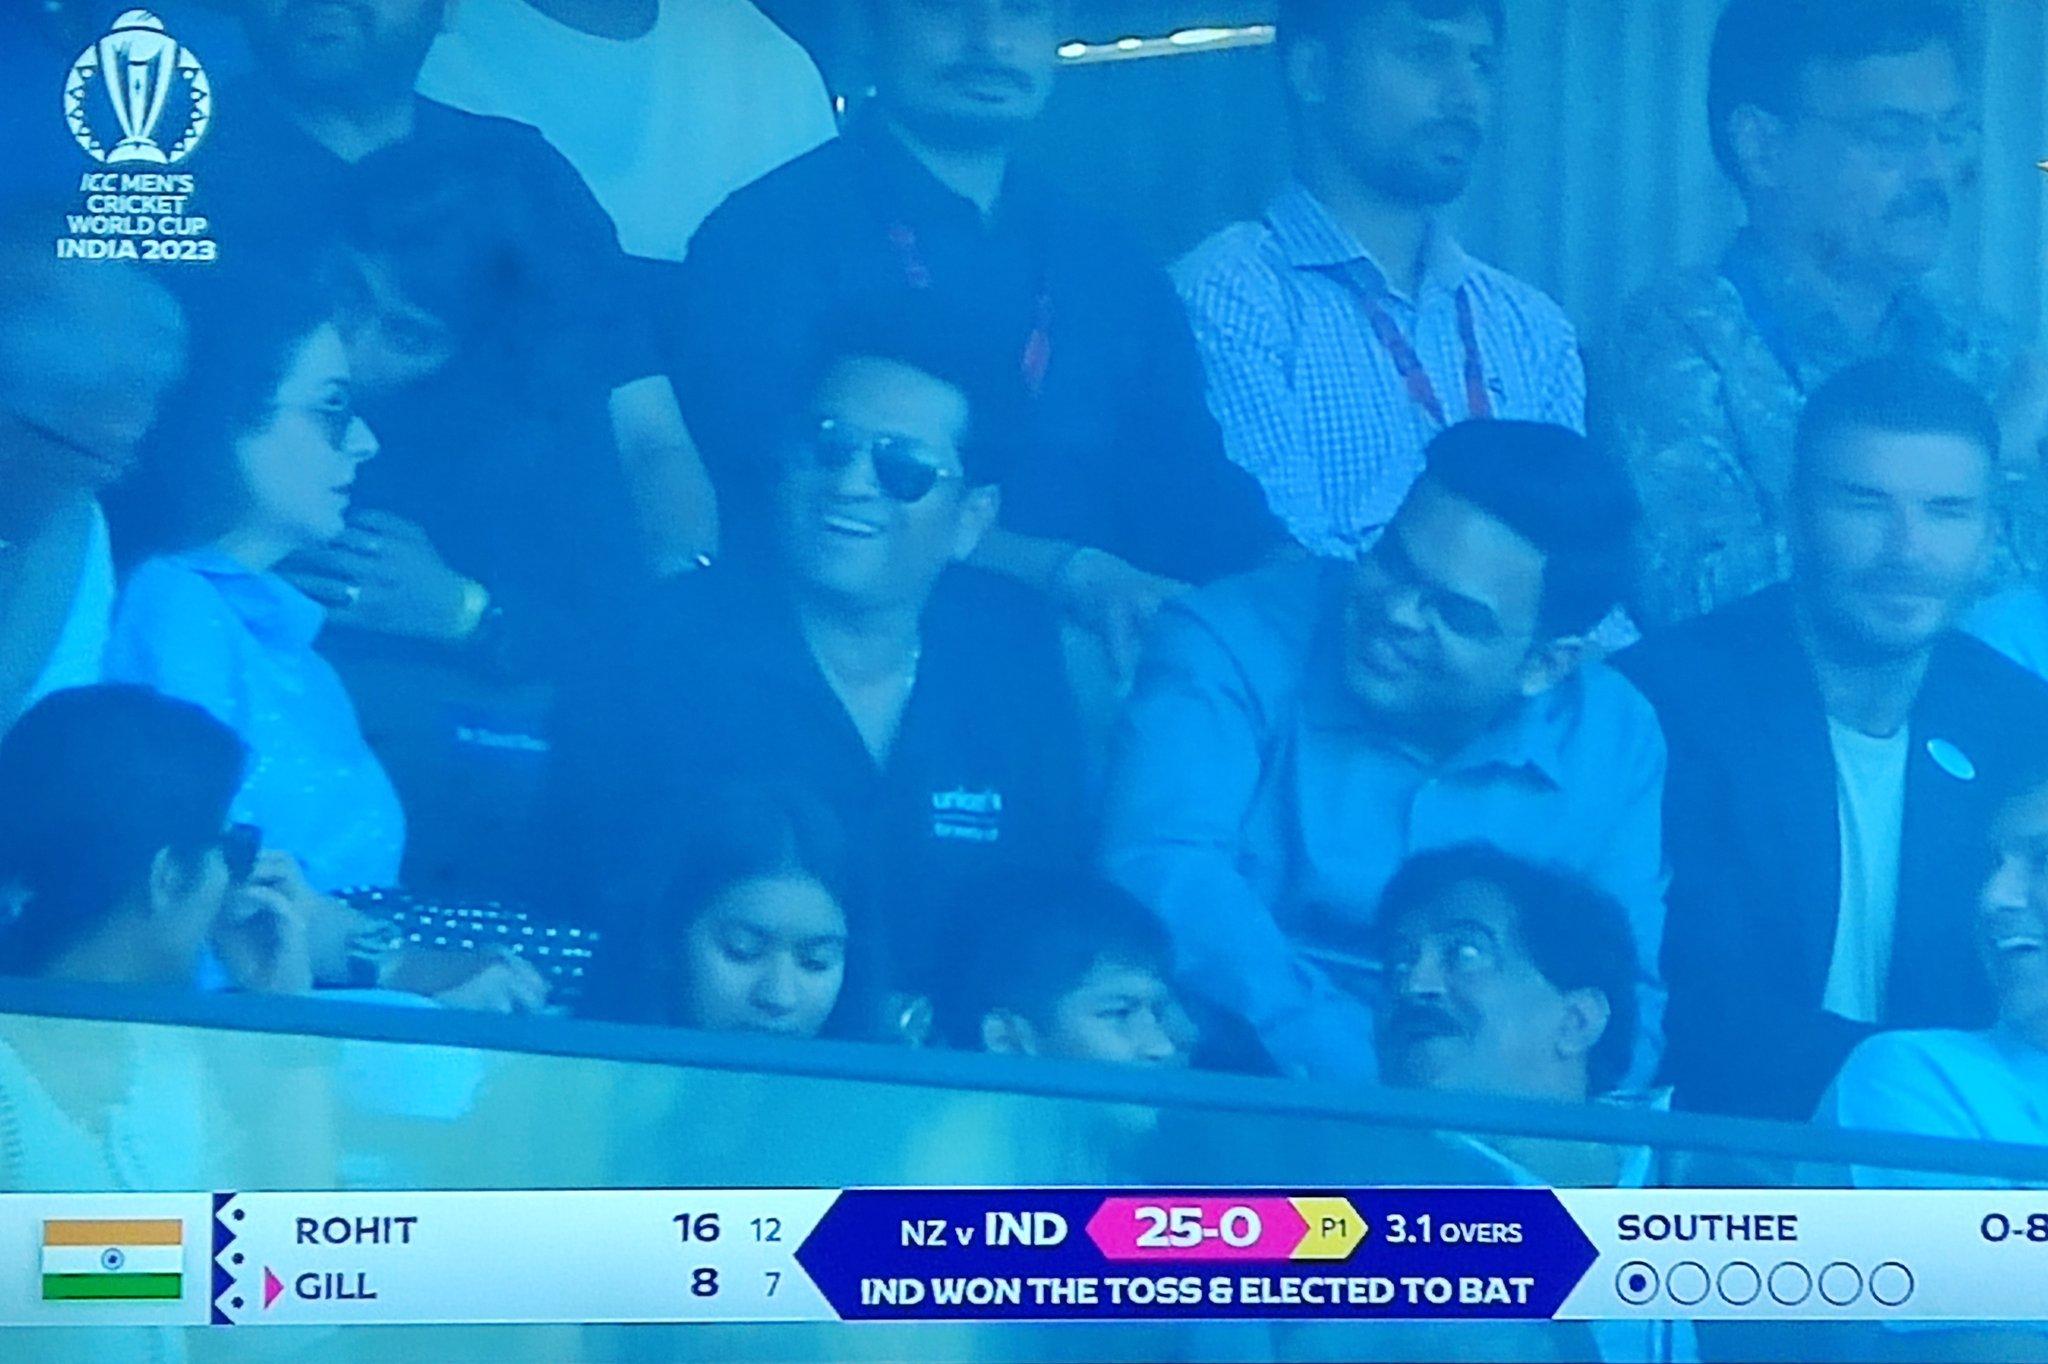 David Beckham and Sachin Tendulkar sharing a screen is what dreams are made of and more